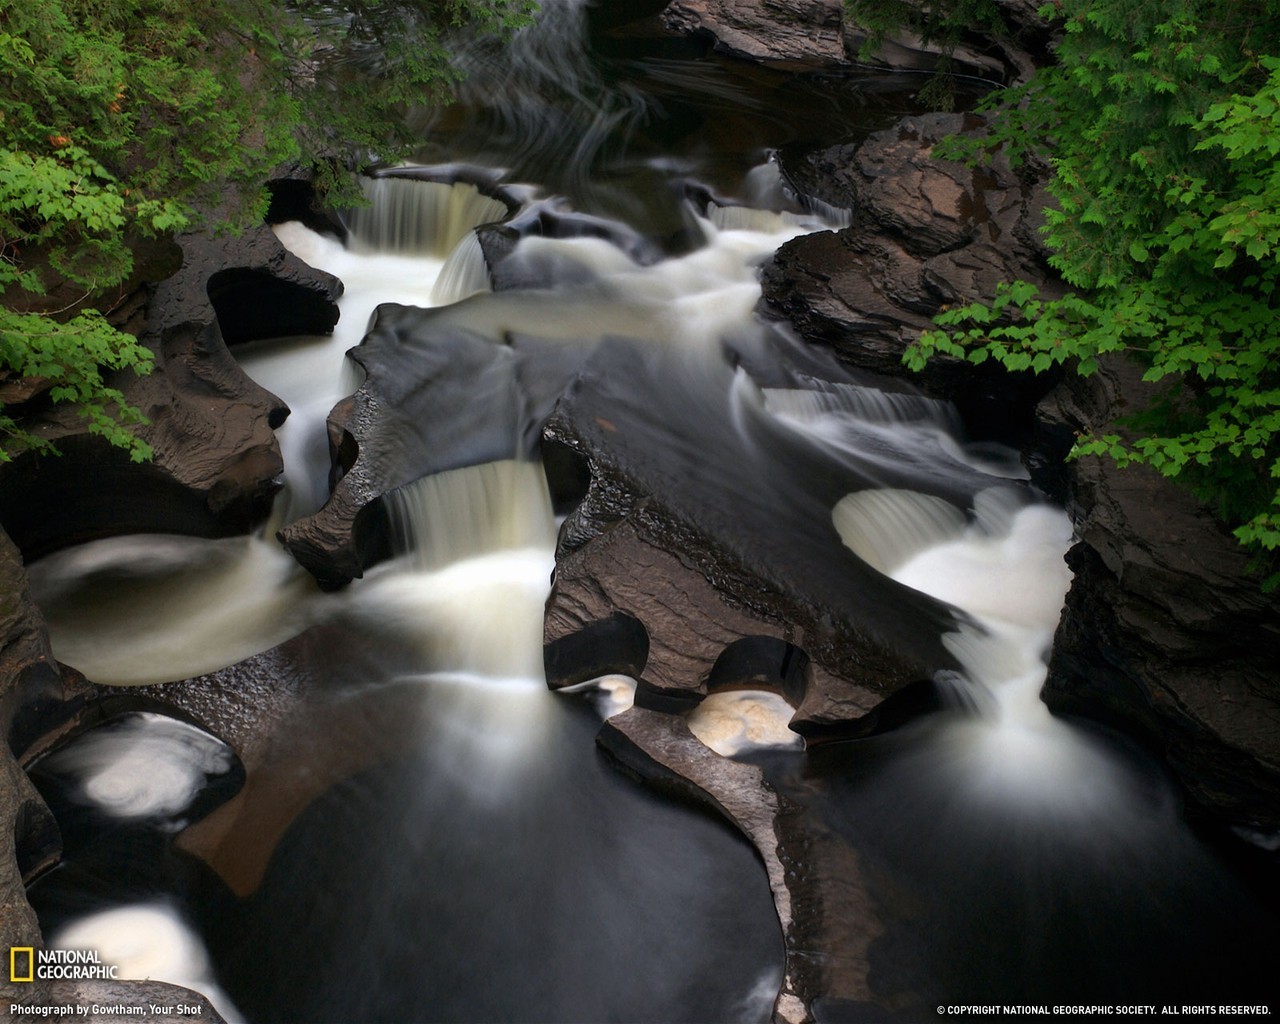 General 1280x1024 waterfall National Geographic nature